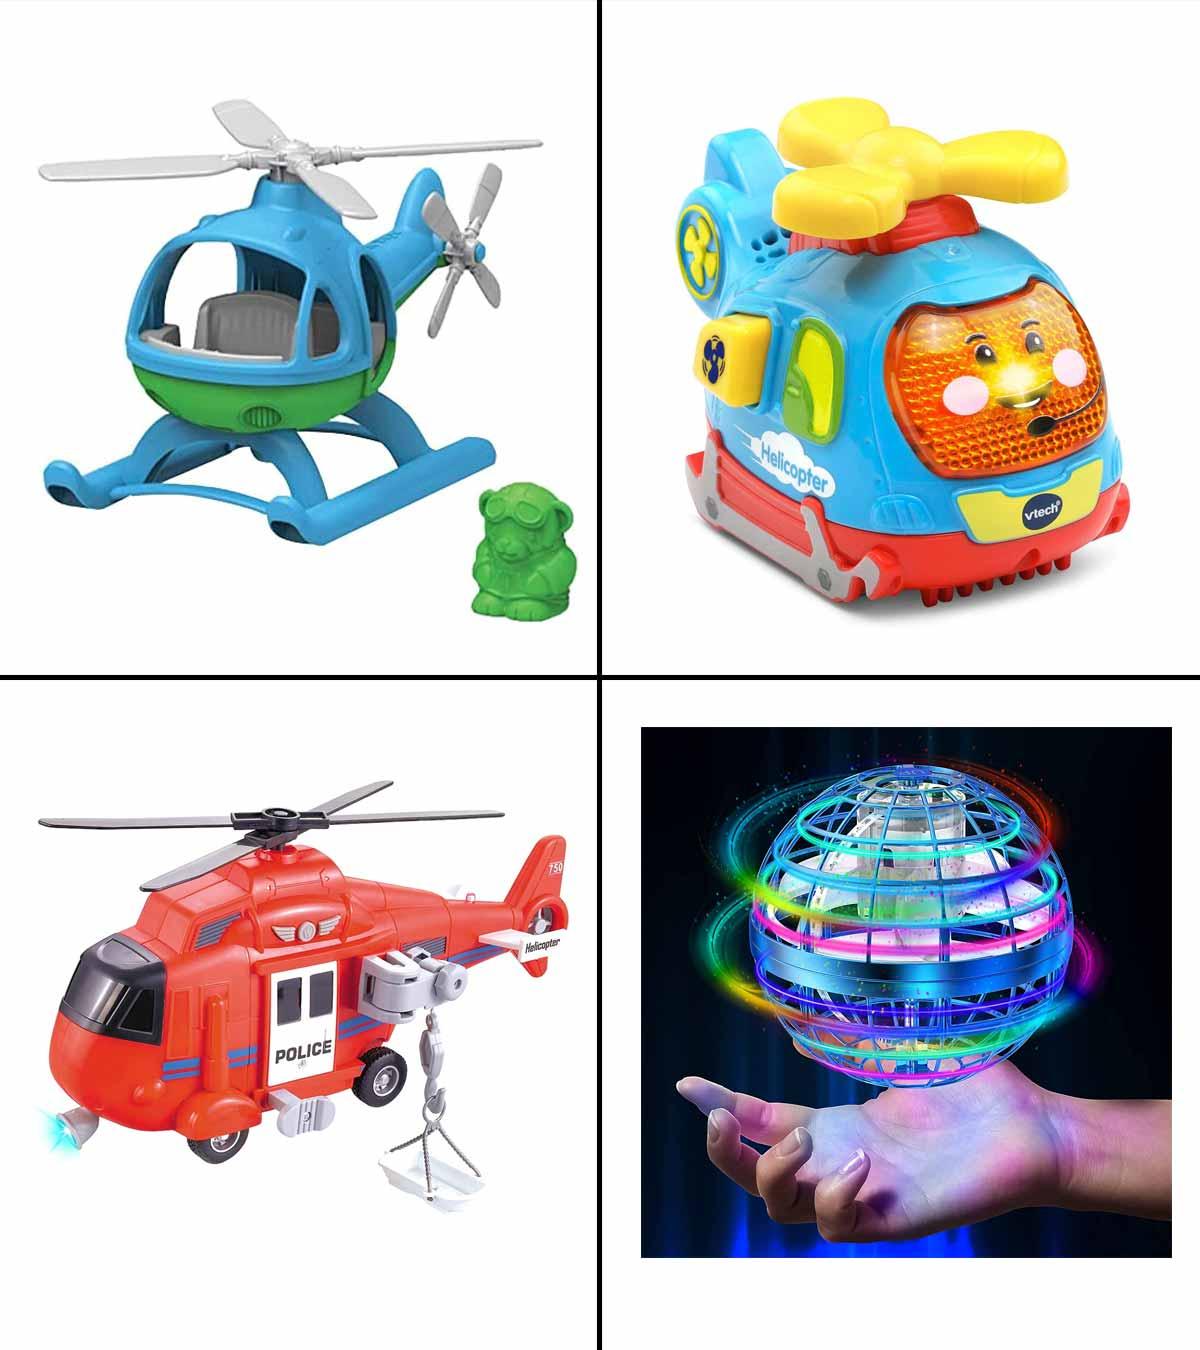 Best Helicopter Toy Remote: Top Picks for Helicopter Toy Remotes: Customer Reviews, Price, and Features